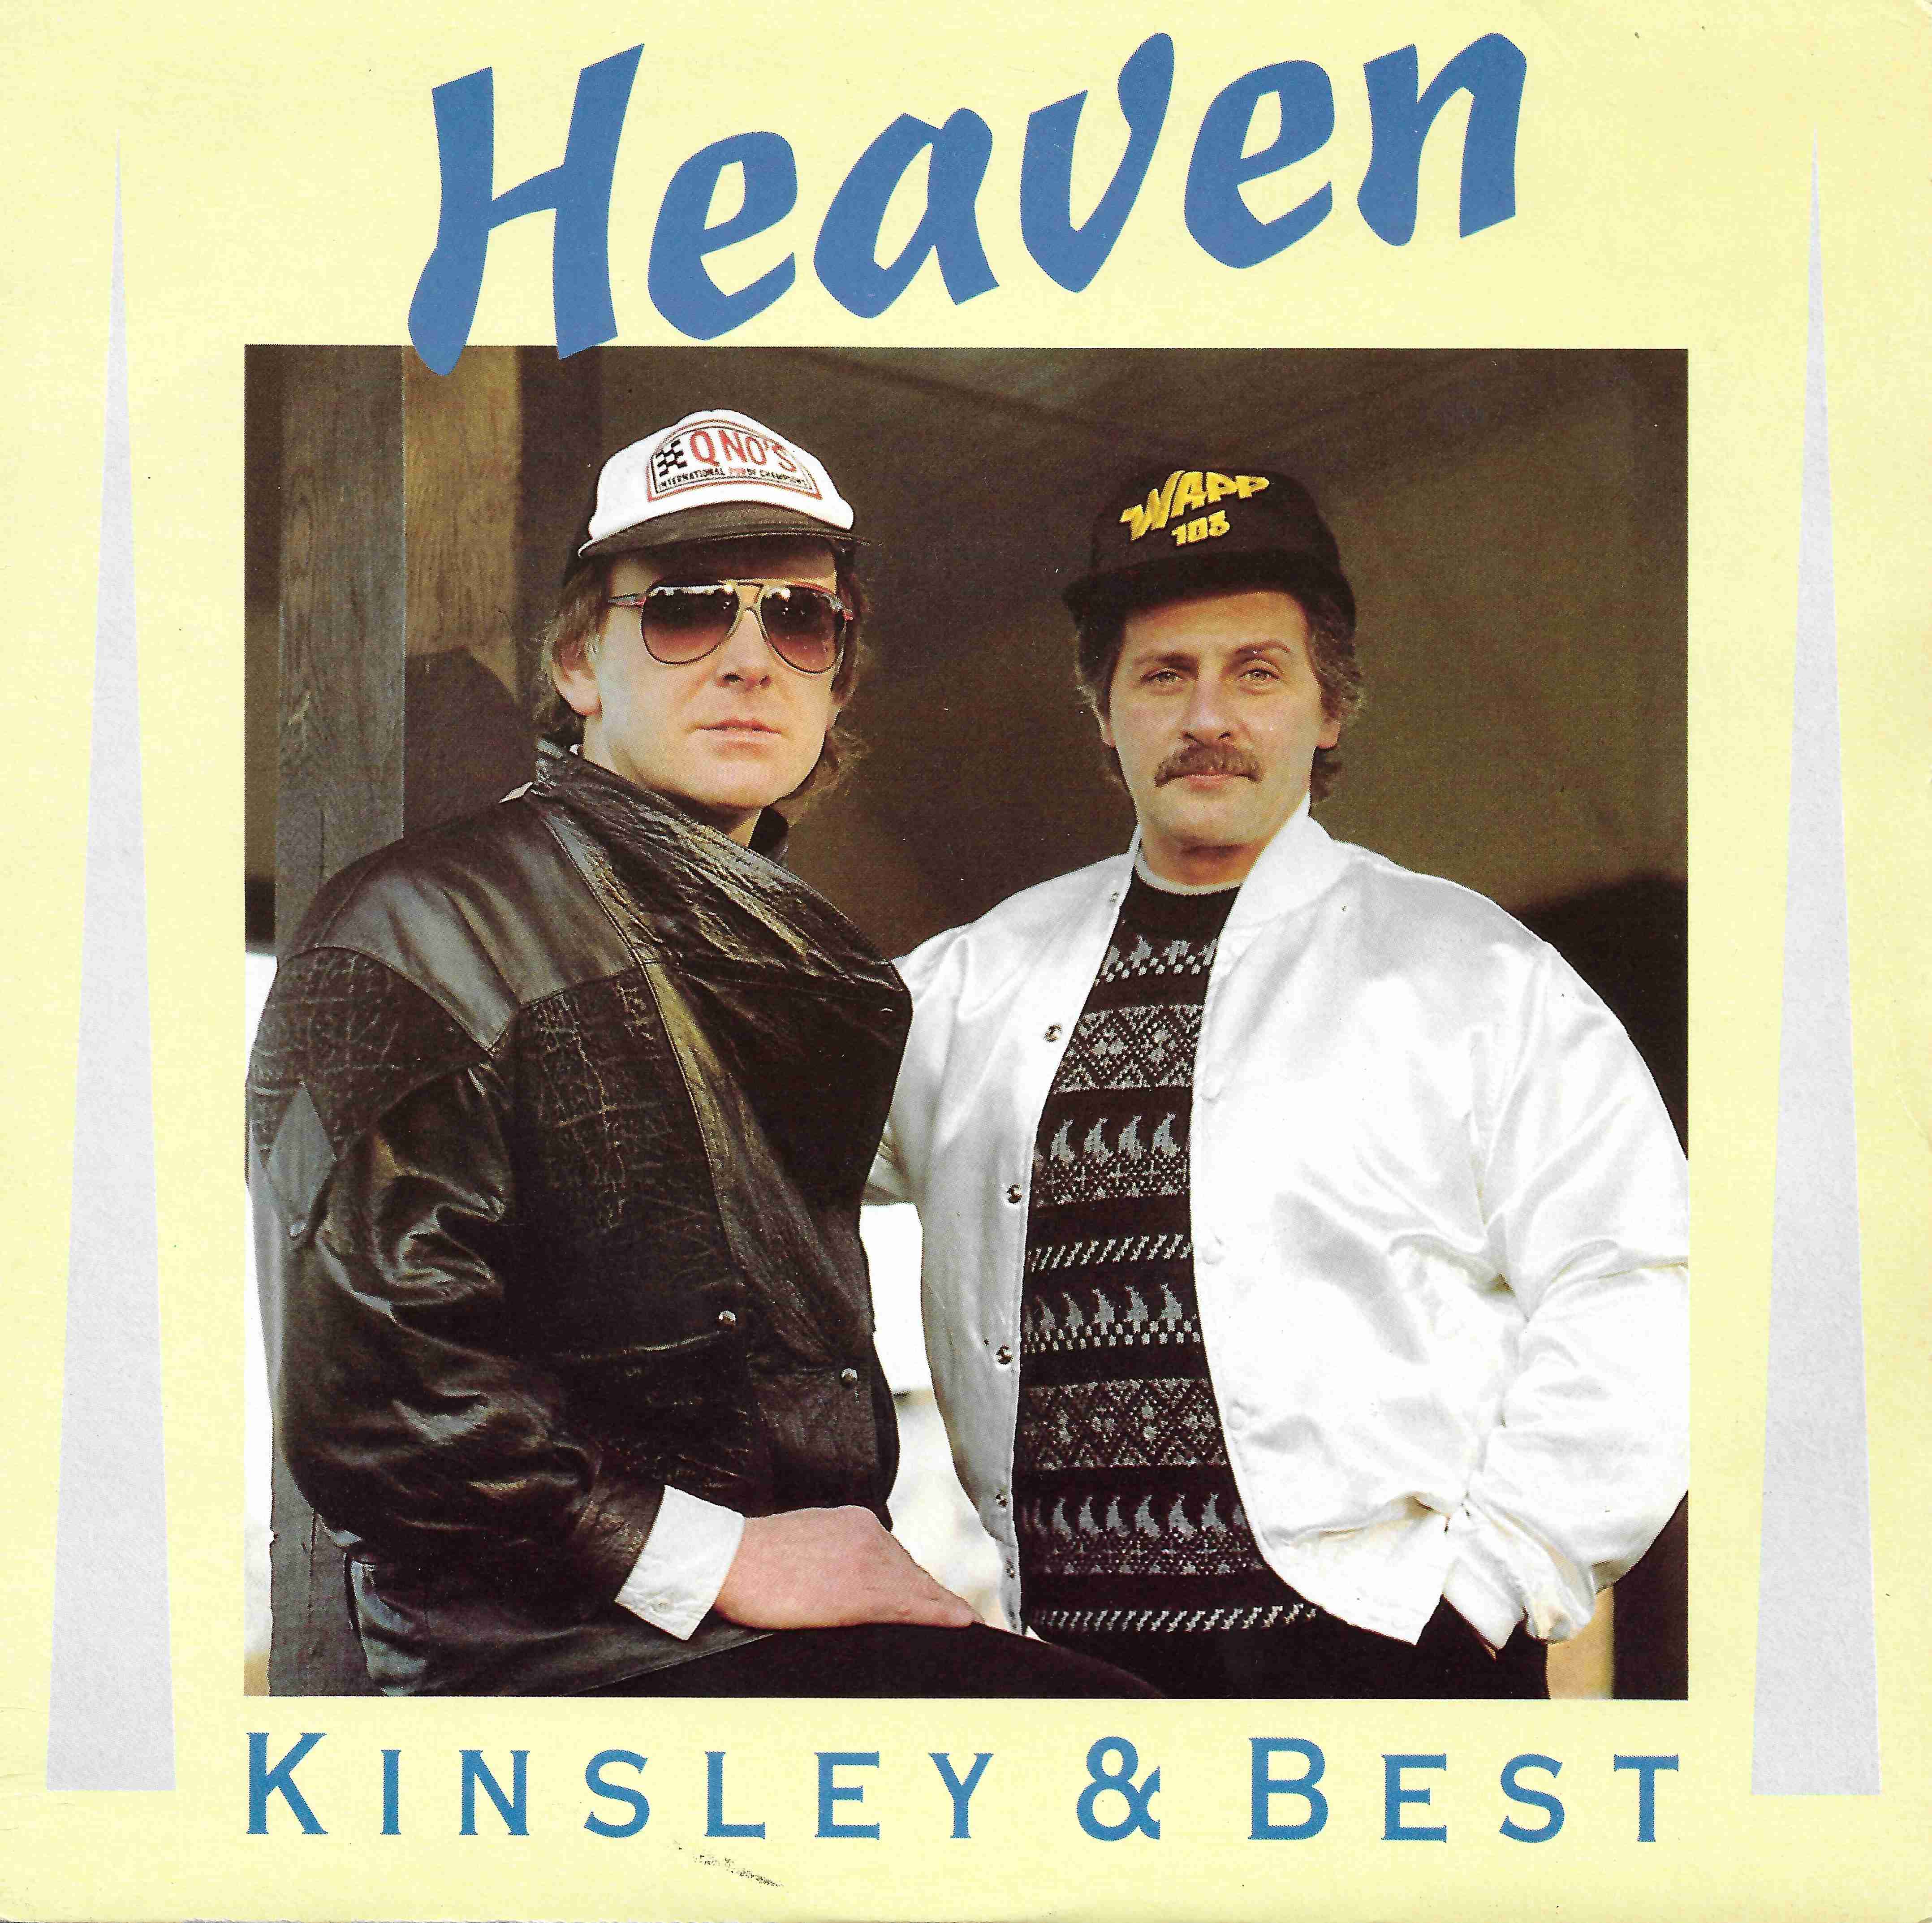 Picture of RESL 242 Heaven by artist Bill Kingsley / Pete Best / Rick Wakeman / Mark Haley from the BBC records and Tapes library